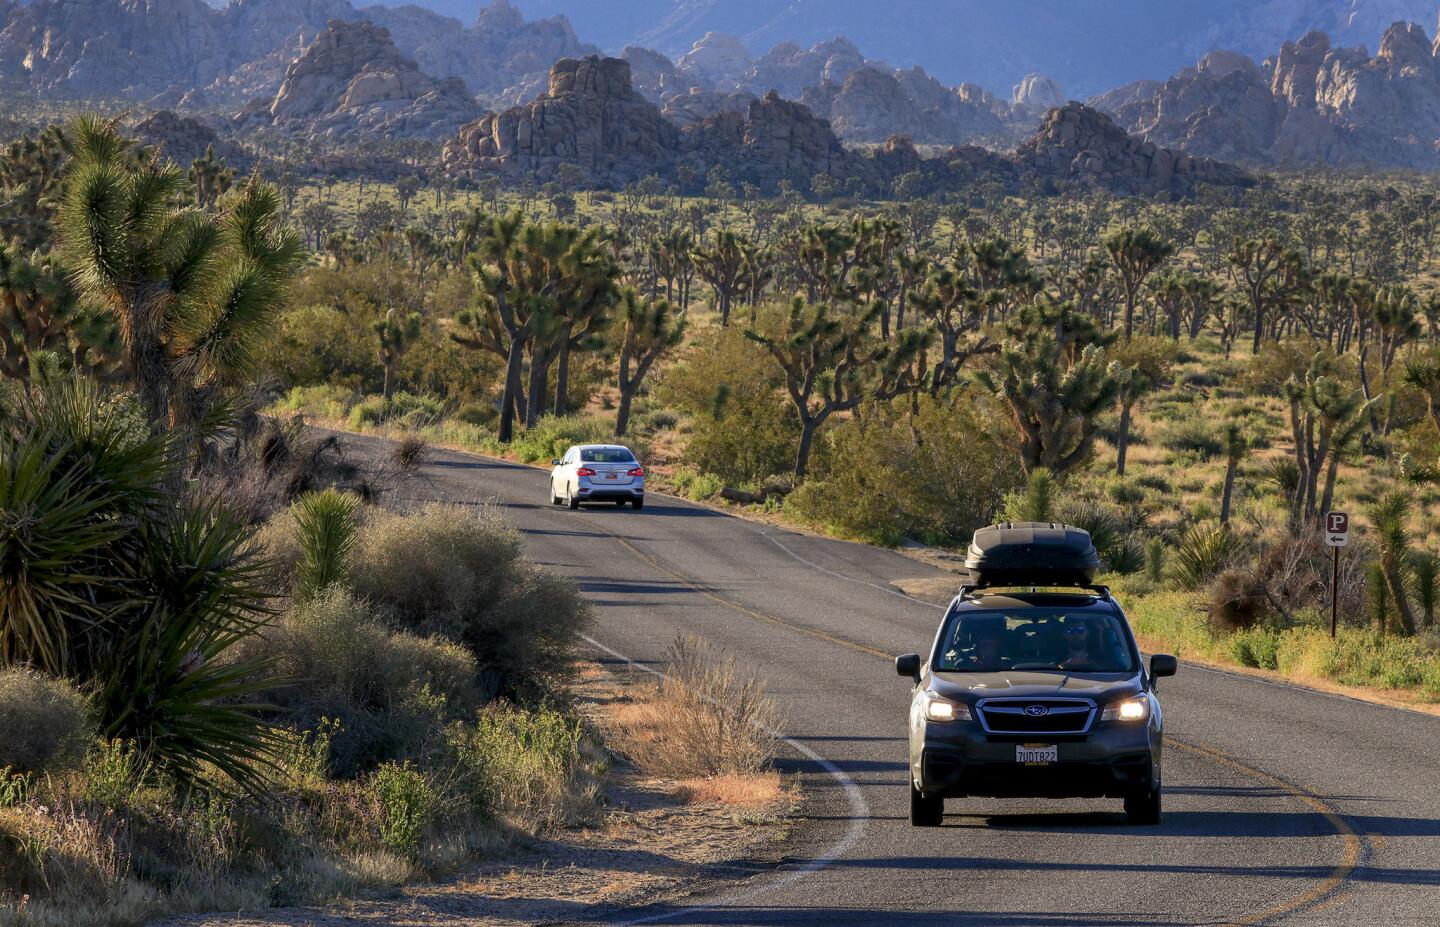 JOSHUA TREE NATIONAL PARK ,CA., APRIL 6, 2019: Visitors coming and going begin the early morning commute along Park Blvd past amazing rock formations and the namesake Joshua Trees in Joshua Tree National Park April 6, 2019 (Mark Boster For the LA Times).